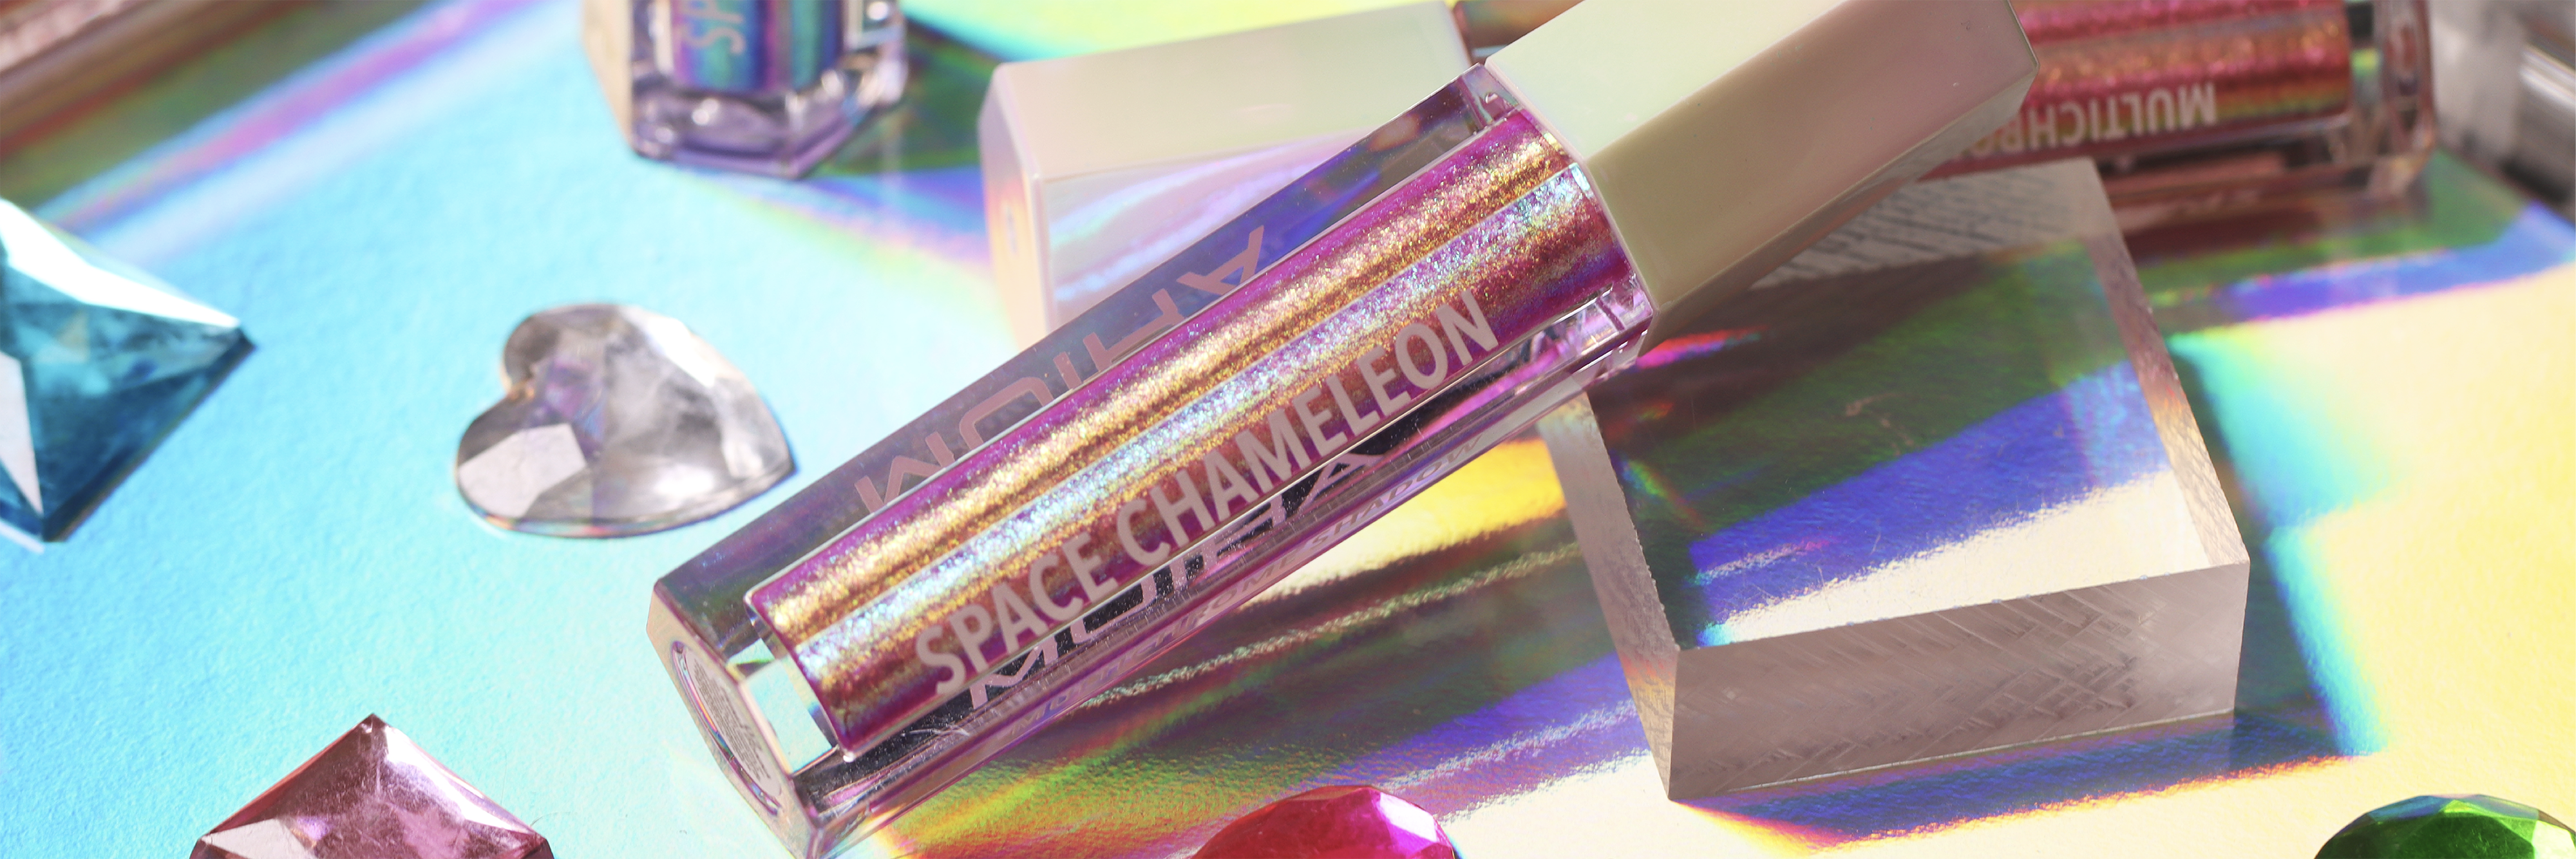 Space Chameleon Multichrome Shadow